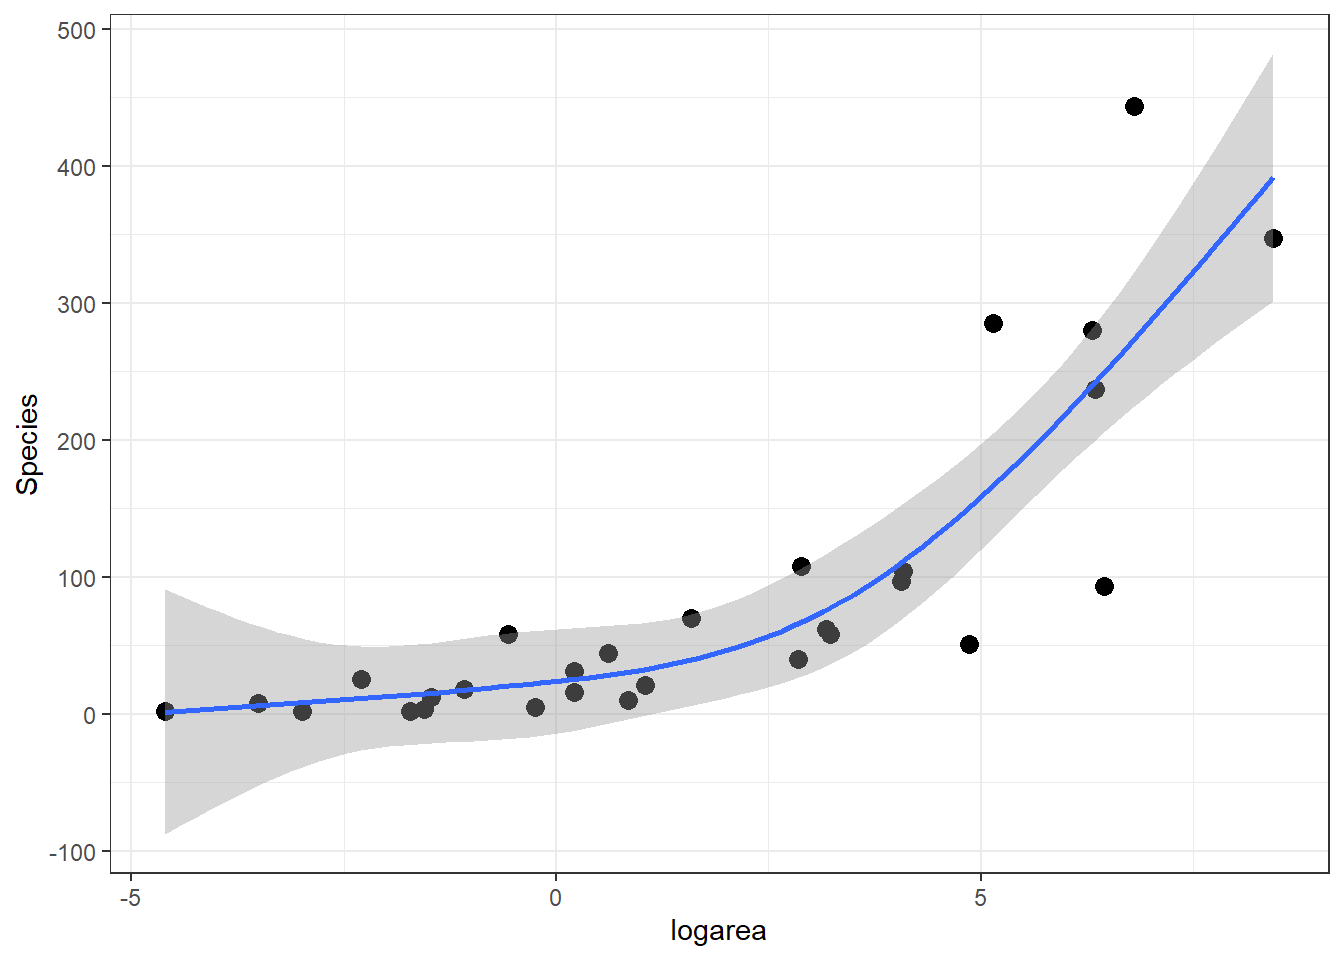 Predicted values from the natural cubic regression spline model relating plant species richness to log(Area) for 29 islands in the Galapagos Islands archipelago. Data are from (Johnson & Raven, 1973).